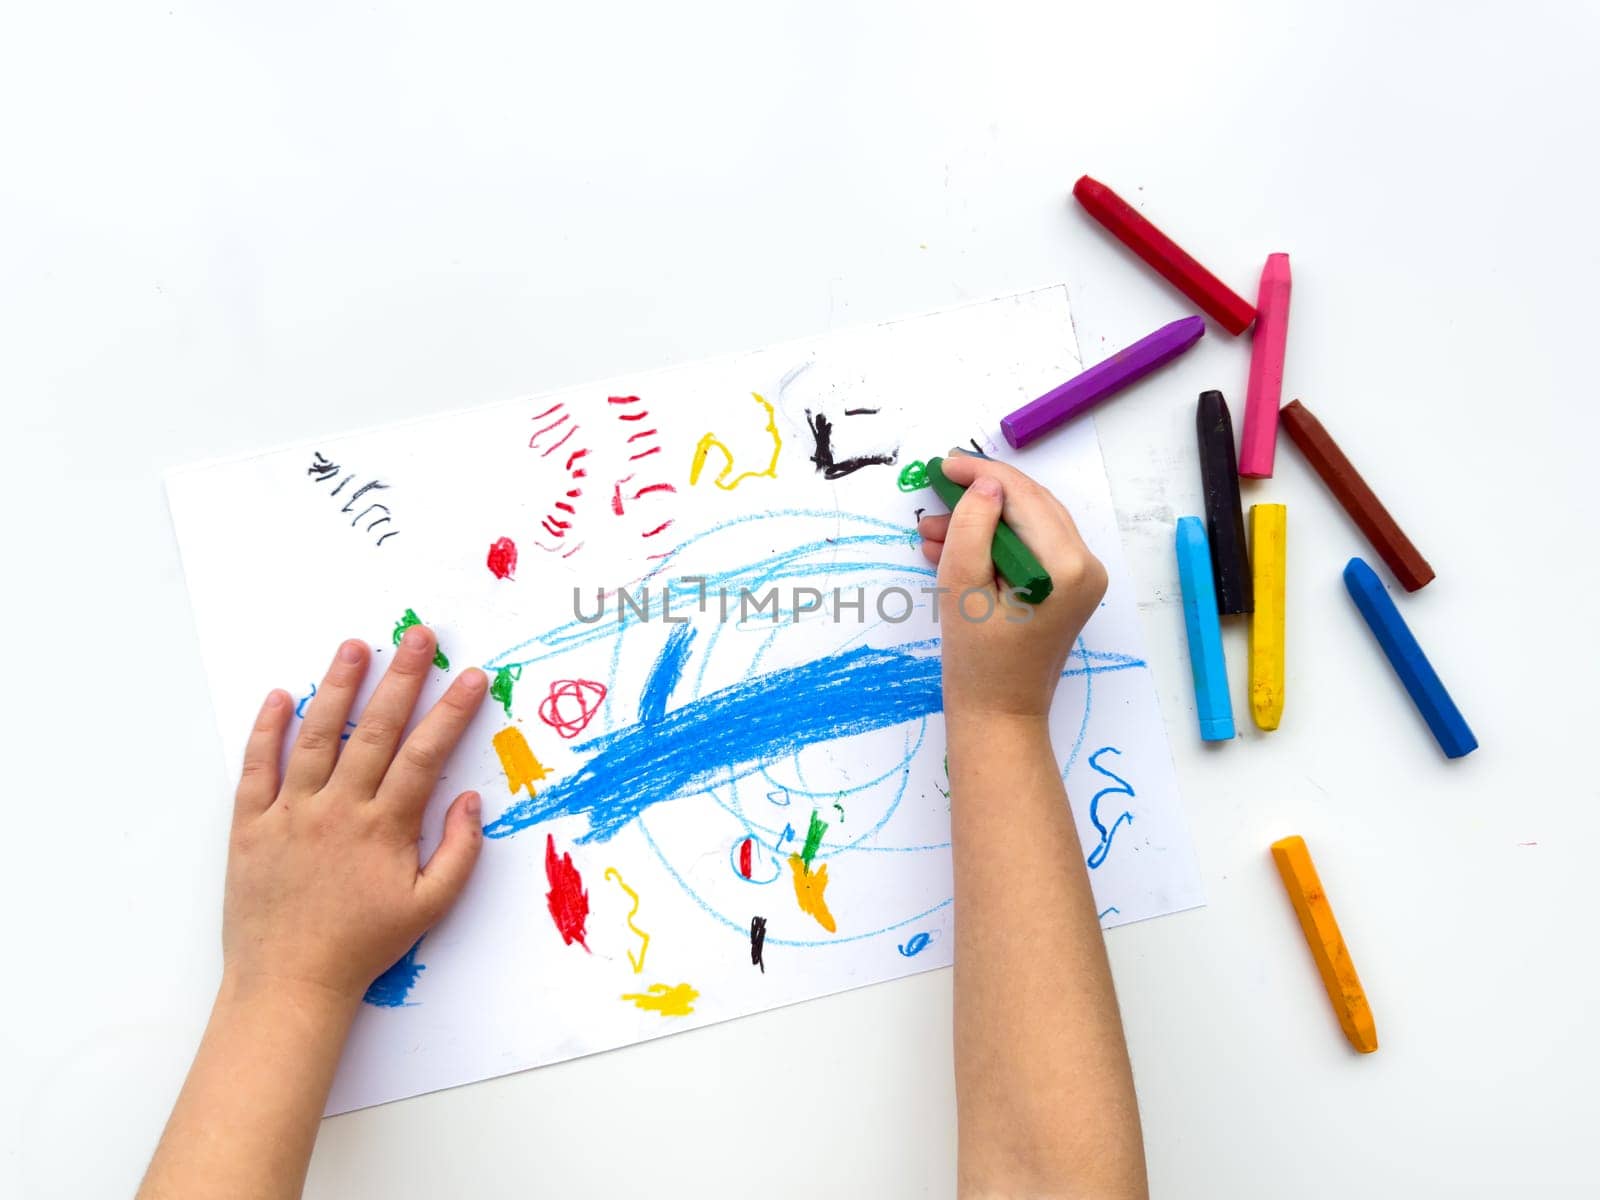 Childs hands drawing with colorful wax crayons on white paper, top view. Creative art concept for educational and developmental activities. by Lunnica